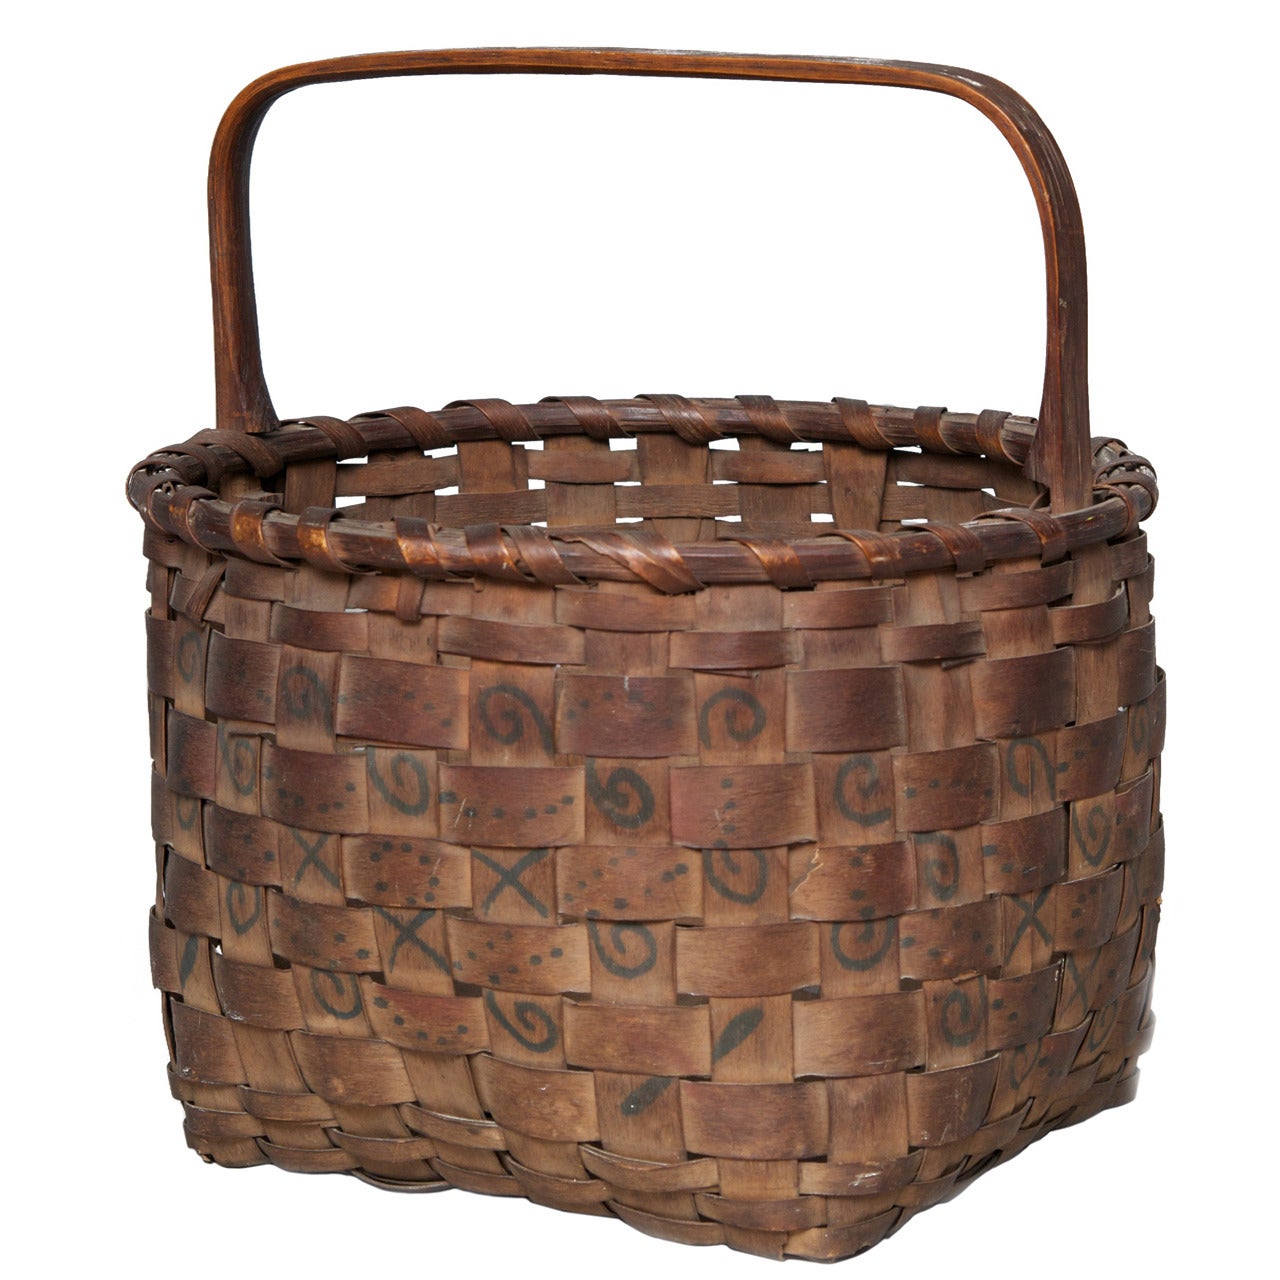 Antique Native American Basket with Handle, 19th Century